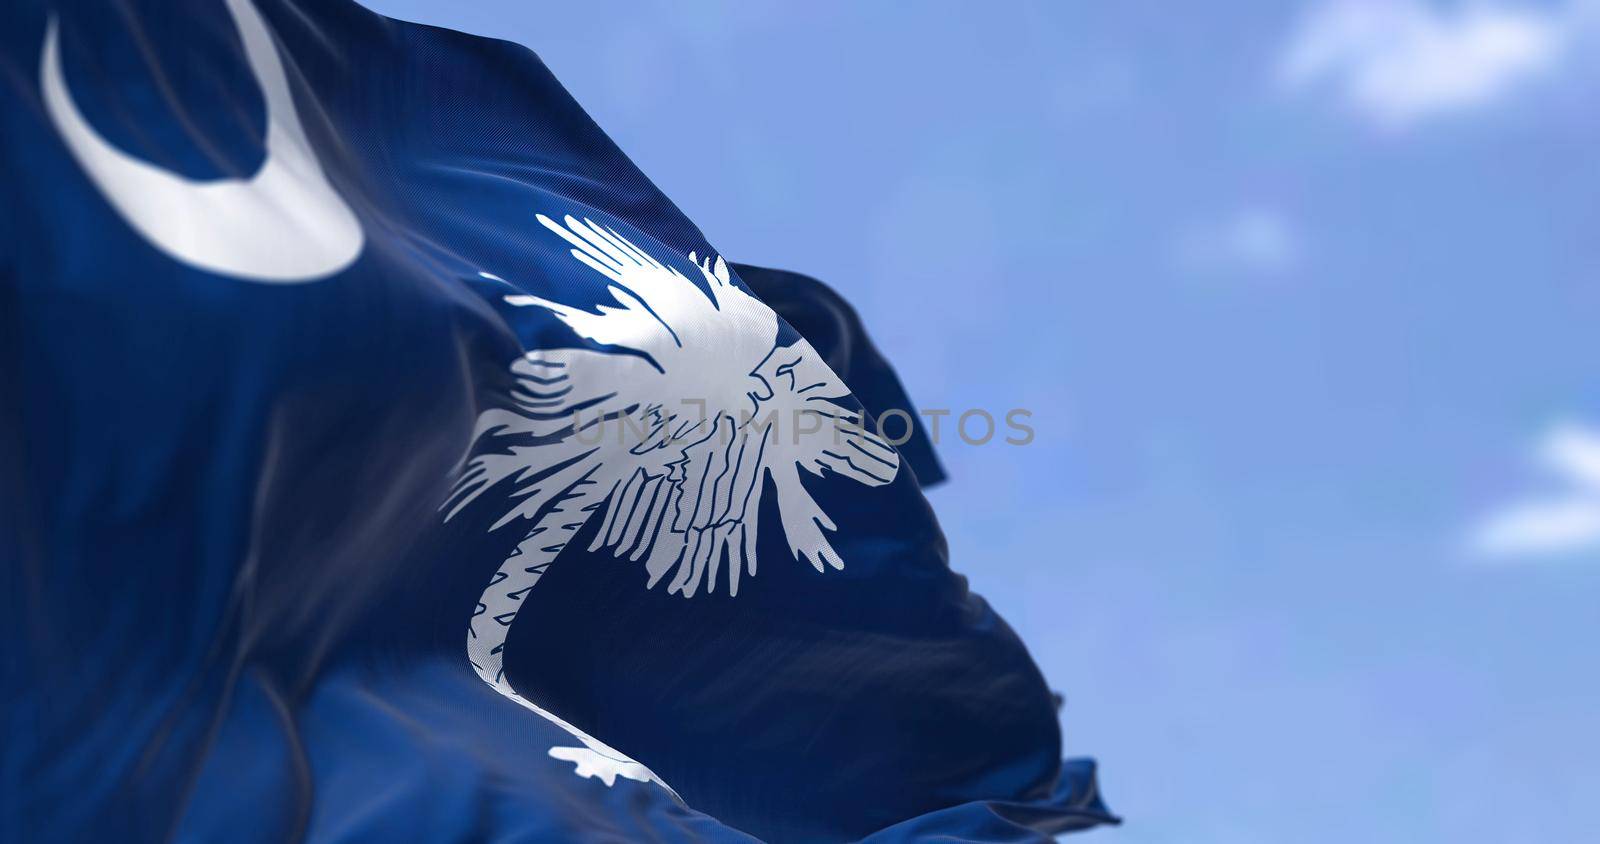 The US state flag of South Carolina waving in the wind. South Carolina is a state in the coastal Southeastern region of the United States. Democracy and independence.